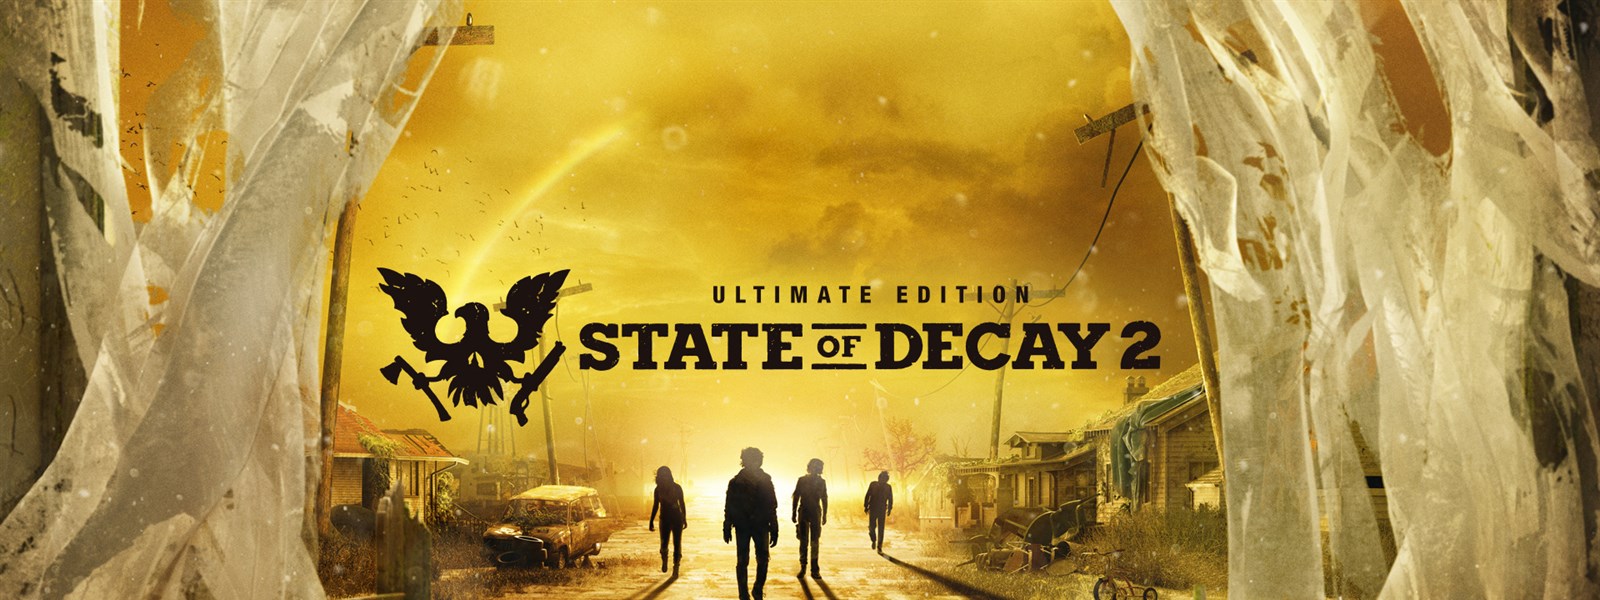 State of Decay 2: Ultimate Edition ya disponible para Xbox One y Windows 10 como Play Anywhere